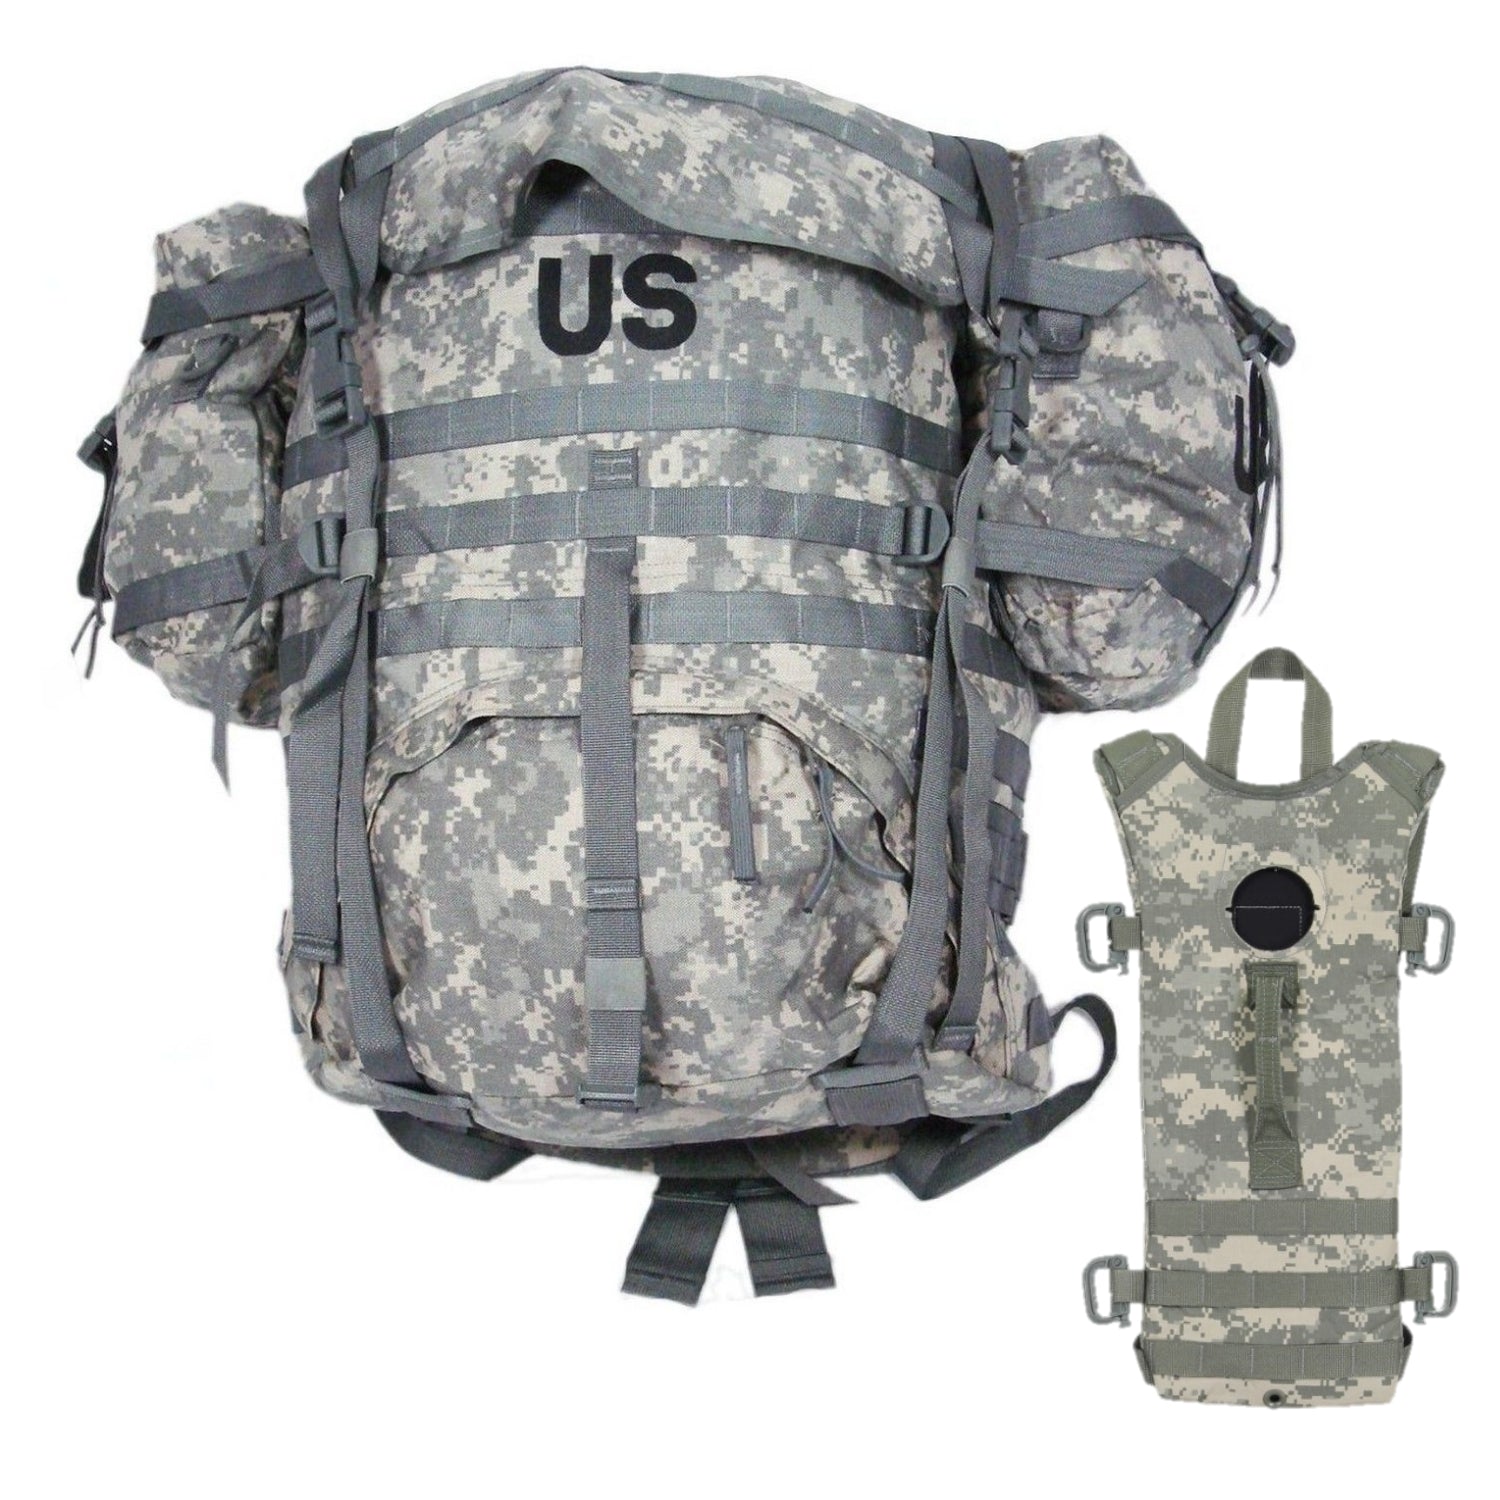 Kidney Army Pouches 2 Pads II Navy GI Military McGuire ACU Large US Frame, Molle – RuckSack with and